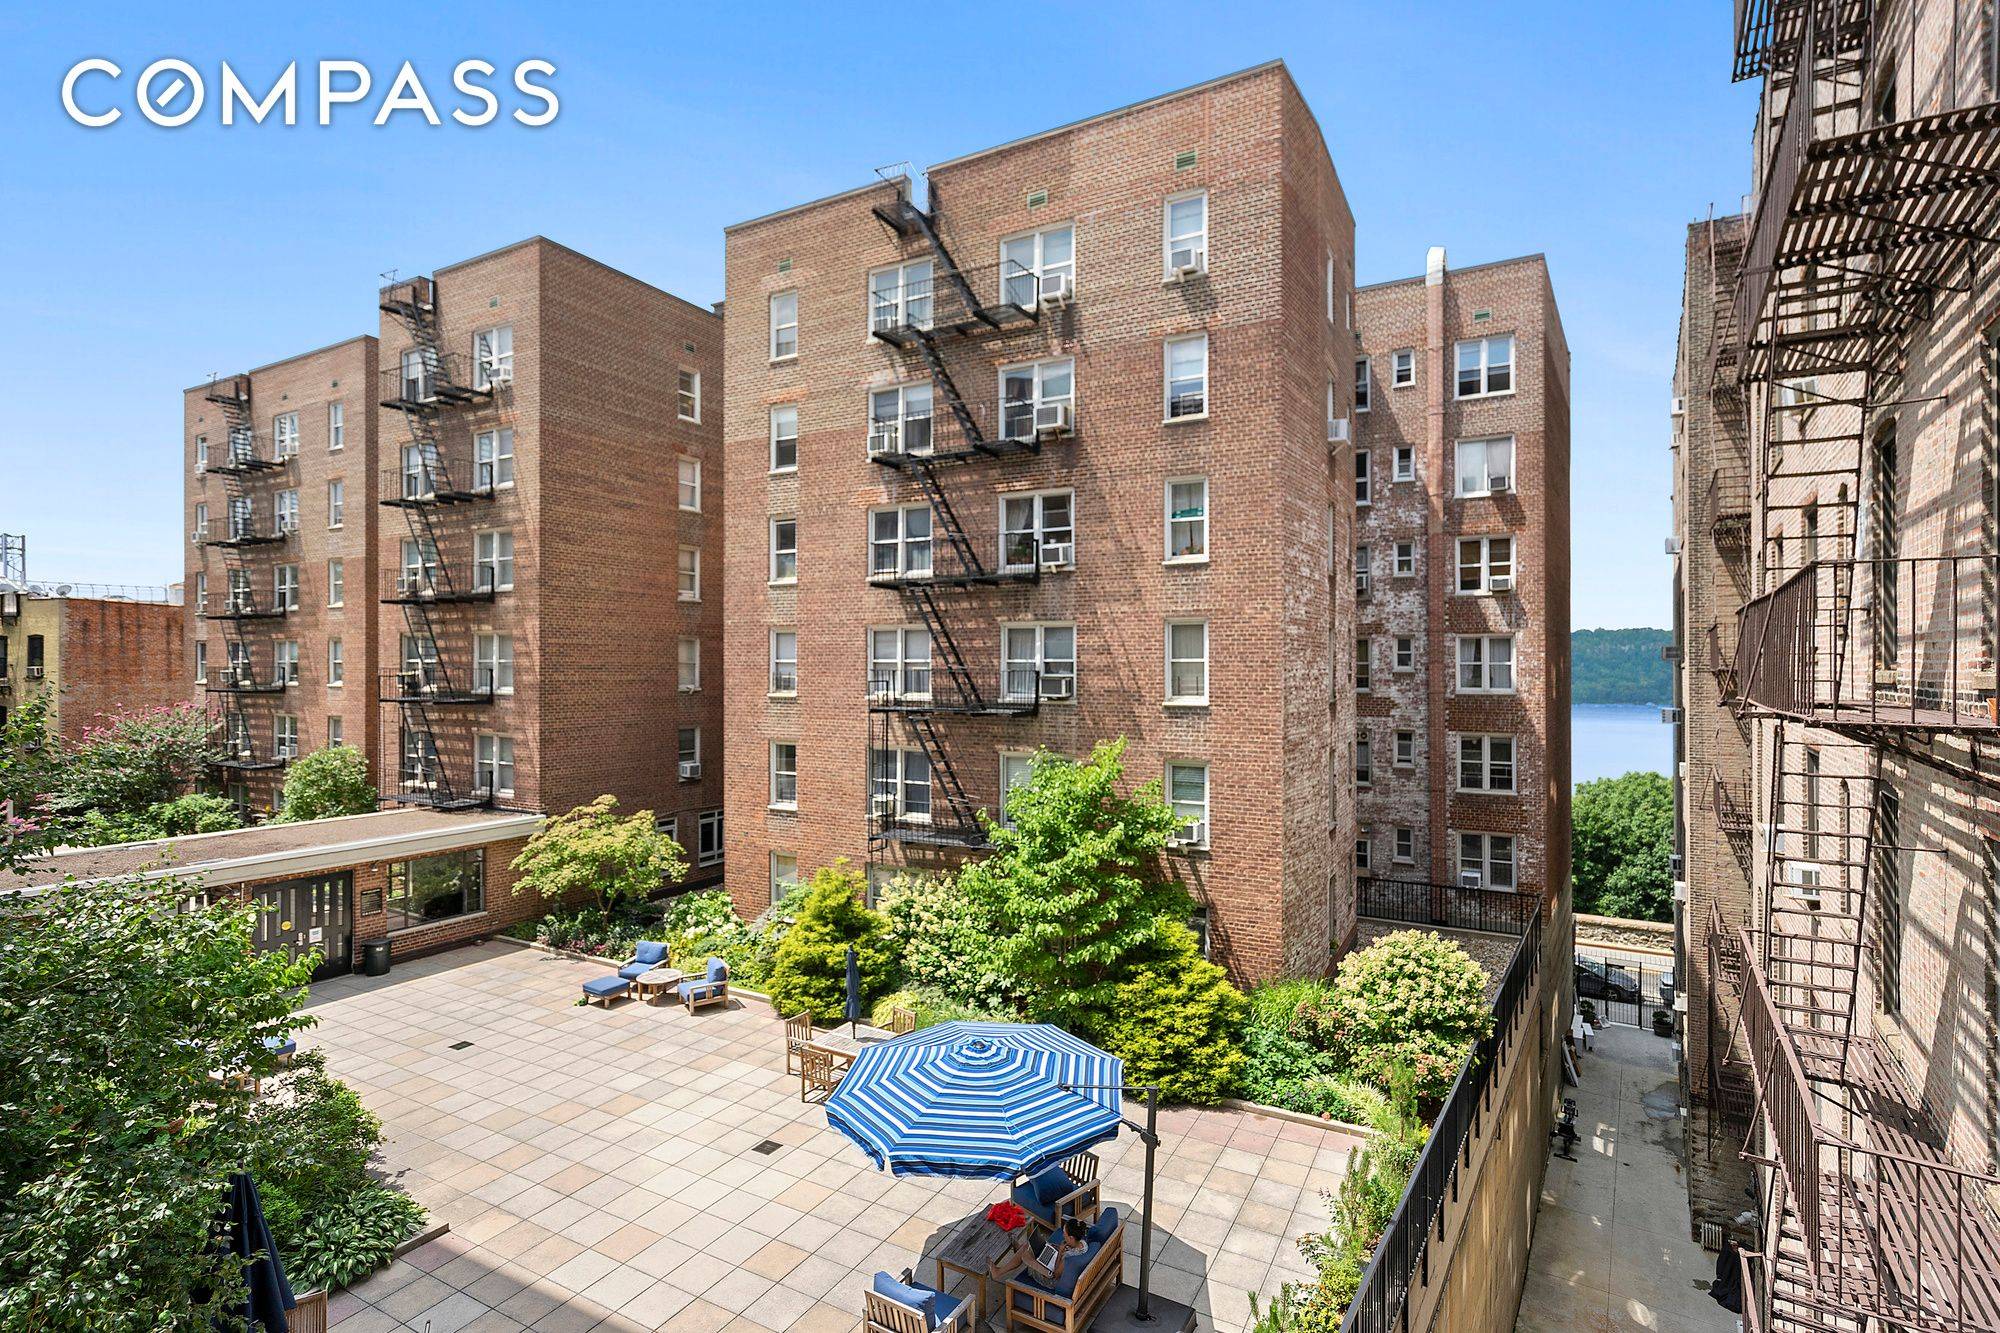 Lafayette Gardens is an established cooperative complex located in the lovely neighborhood of Hudson Heights, walking distance to the subway with easy access onto the West Side Highway.